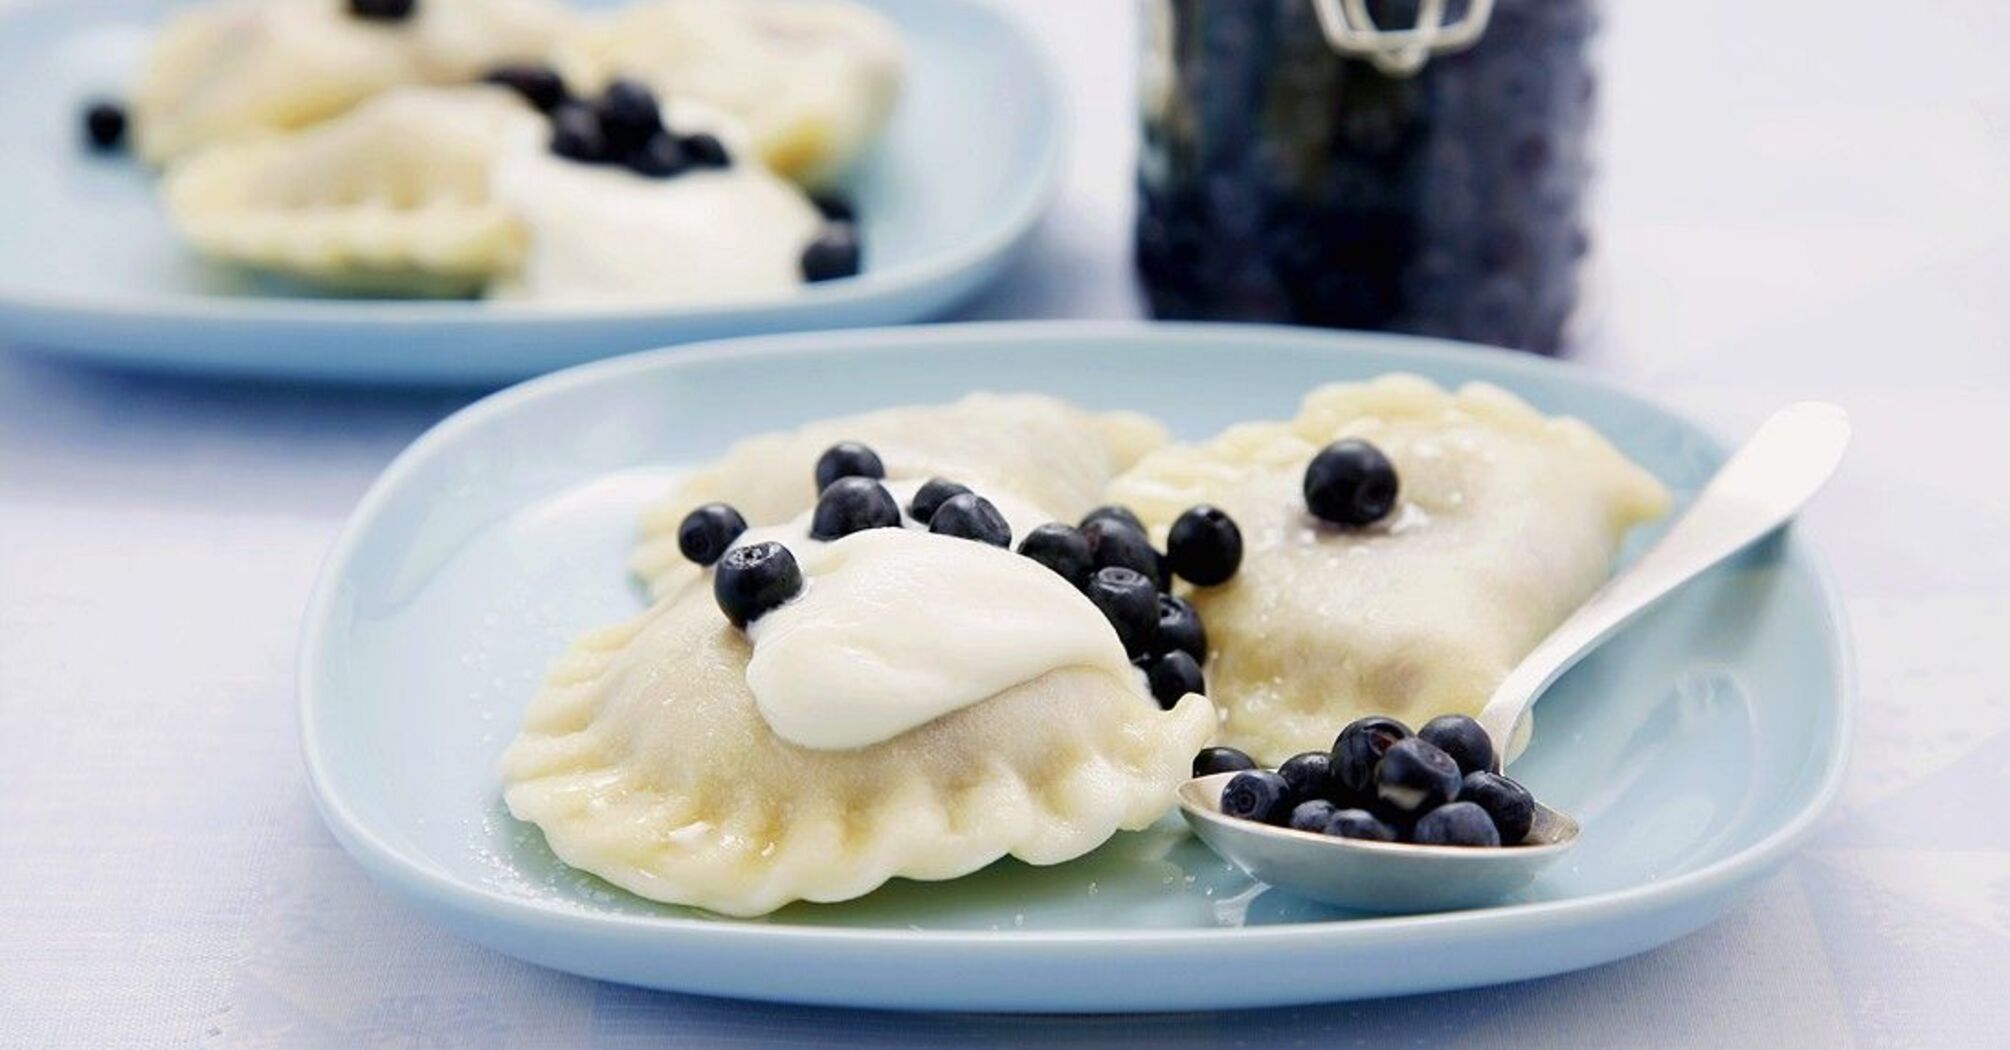 Sweet and puffy: recipe for steamed blueberry varenyky